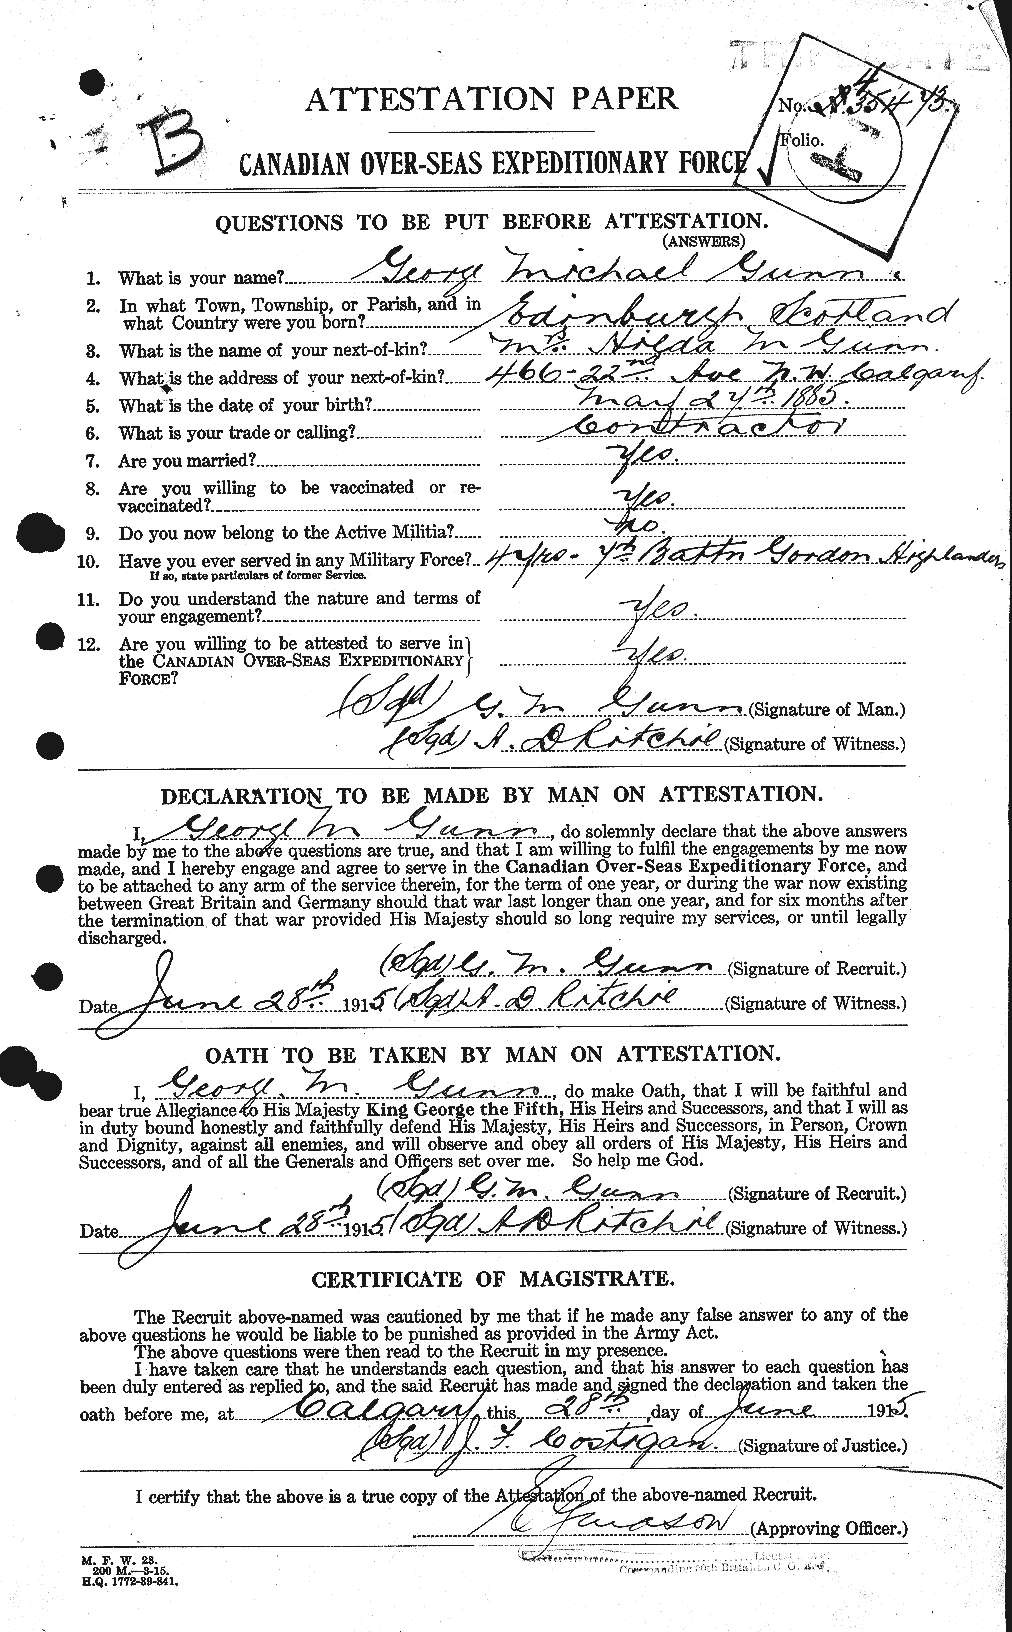 Personnel Records of the First World War - CEF 369244a